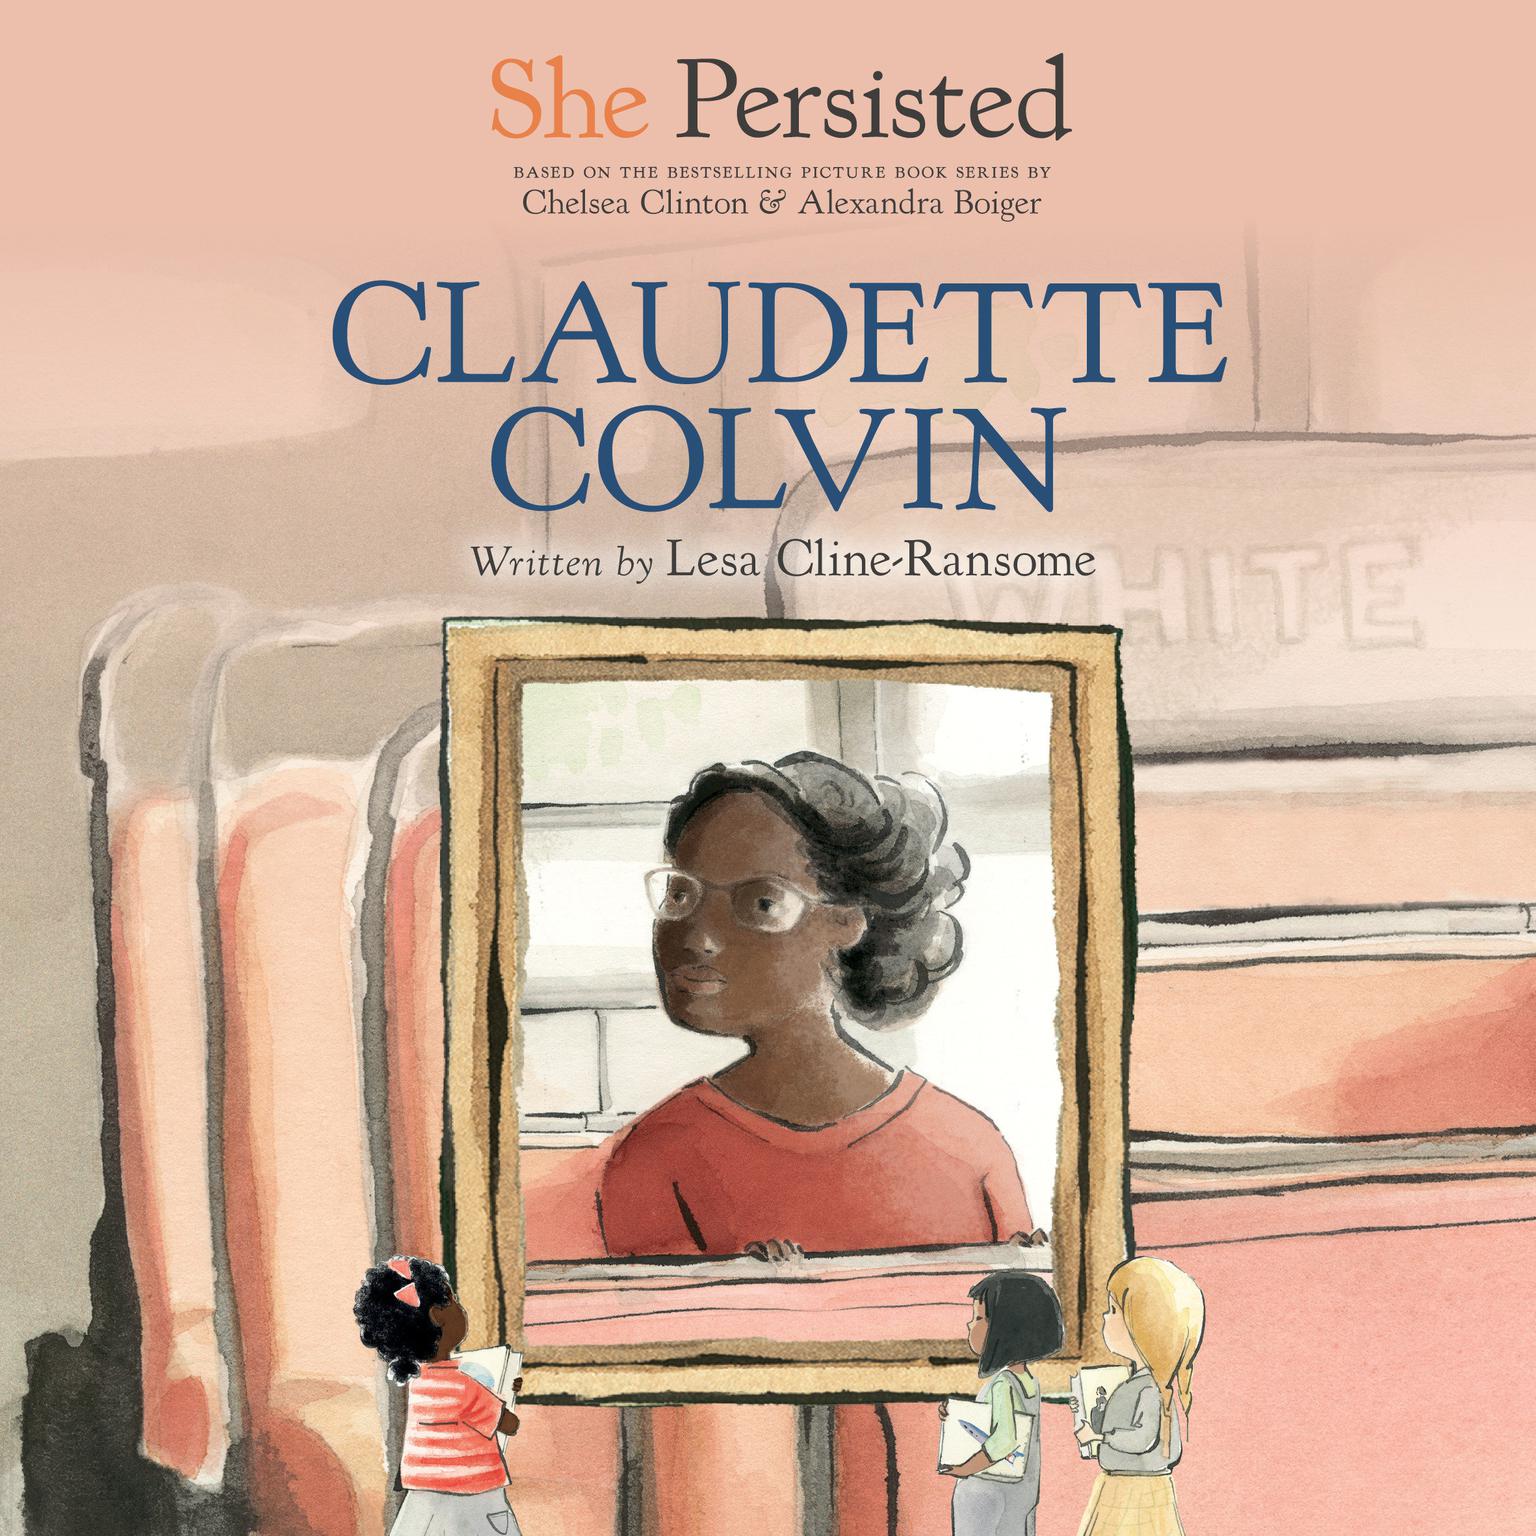 She Persisted: Claudette Colvin Audiobook, by Lesa Cline-Ransome